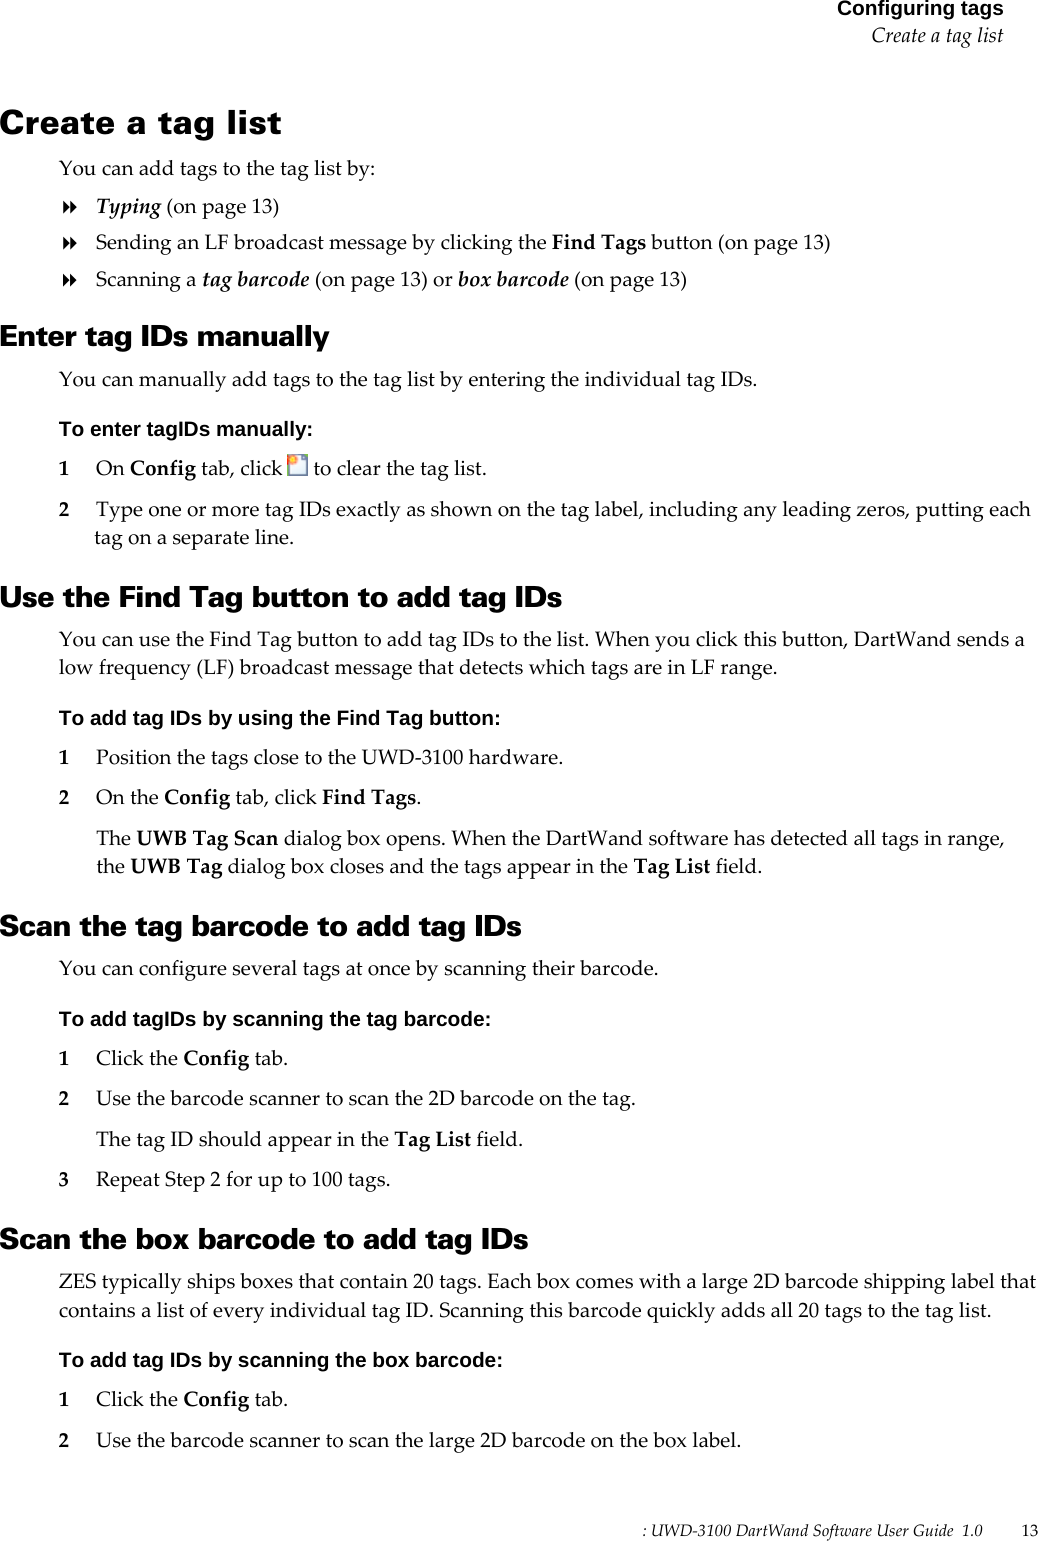 : UWD-3100 DartWand Software User Guide  1.0   13  Configuring tagsCreate a tag list Create a tag list You can add tags to the tag list by:  Typing (on page 13)  Sending an LF broadcast message by clicking the Find Tags button (on page 13)  Scanning a tag barcode (on page 13) or box barcode (on page 13)  Enter tag IDs manually You can manually add tags to the tag list by entering the individual tag IDs. To enter tagIDs manually: 1 On Config tab, click   to clear the tag list. 2 Type one or more tag IDs exactly as shown on the tag label, including any leading zeros, putting each tag on a separate line.  Use the Find Tag button to add tag IDs You can use the Find Tag button to add tag IDs to the list. When you click this button, DartWand sends a low frequency (LF) broadcast message that detects which tags are in LF range. To add tag IDs by using the Find Tag button: 1 Position the tags close to the UWD-3100 hardware. 2 On the Config tab, click Find Tags. The UWB Tag Scan dialog box opens. When the DartWand software has detected all tags in range, the UWB Tag dialog box closes and the tags appear in the Tag List field.  Scan the tag barcode to add tag IDs You can configure several tags at once by scanning their barcode. To add tagIDs by scanning the tag barcode: 1 Click the Config tab. 2 Use the barcode scanner to scan the 2D barcode on the tag. The tag ID should appear in the Tag List field. 3 Repeat Step 2 for up to 100 tags.  Scan the box barcode to add tag IDs ZES typically ships boxes that contain 20 tags. Each box comes with a large 2D barcode shipping label that contains a list of every individual tag ID. Scanning this barcode quickly adds all 20 tags to the tag list. To add tag IDs by scanning the box barcode: 1 Click the Config tab. 2 Use the barcode scanner to scan the large 2D barcode on the box label. 